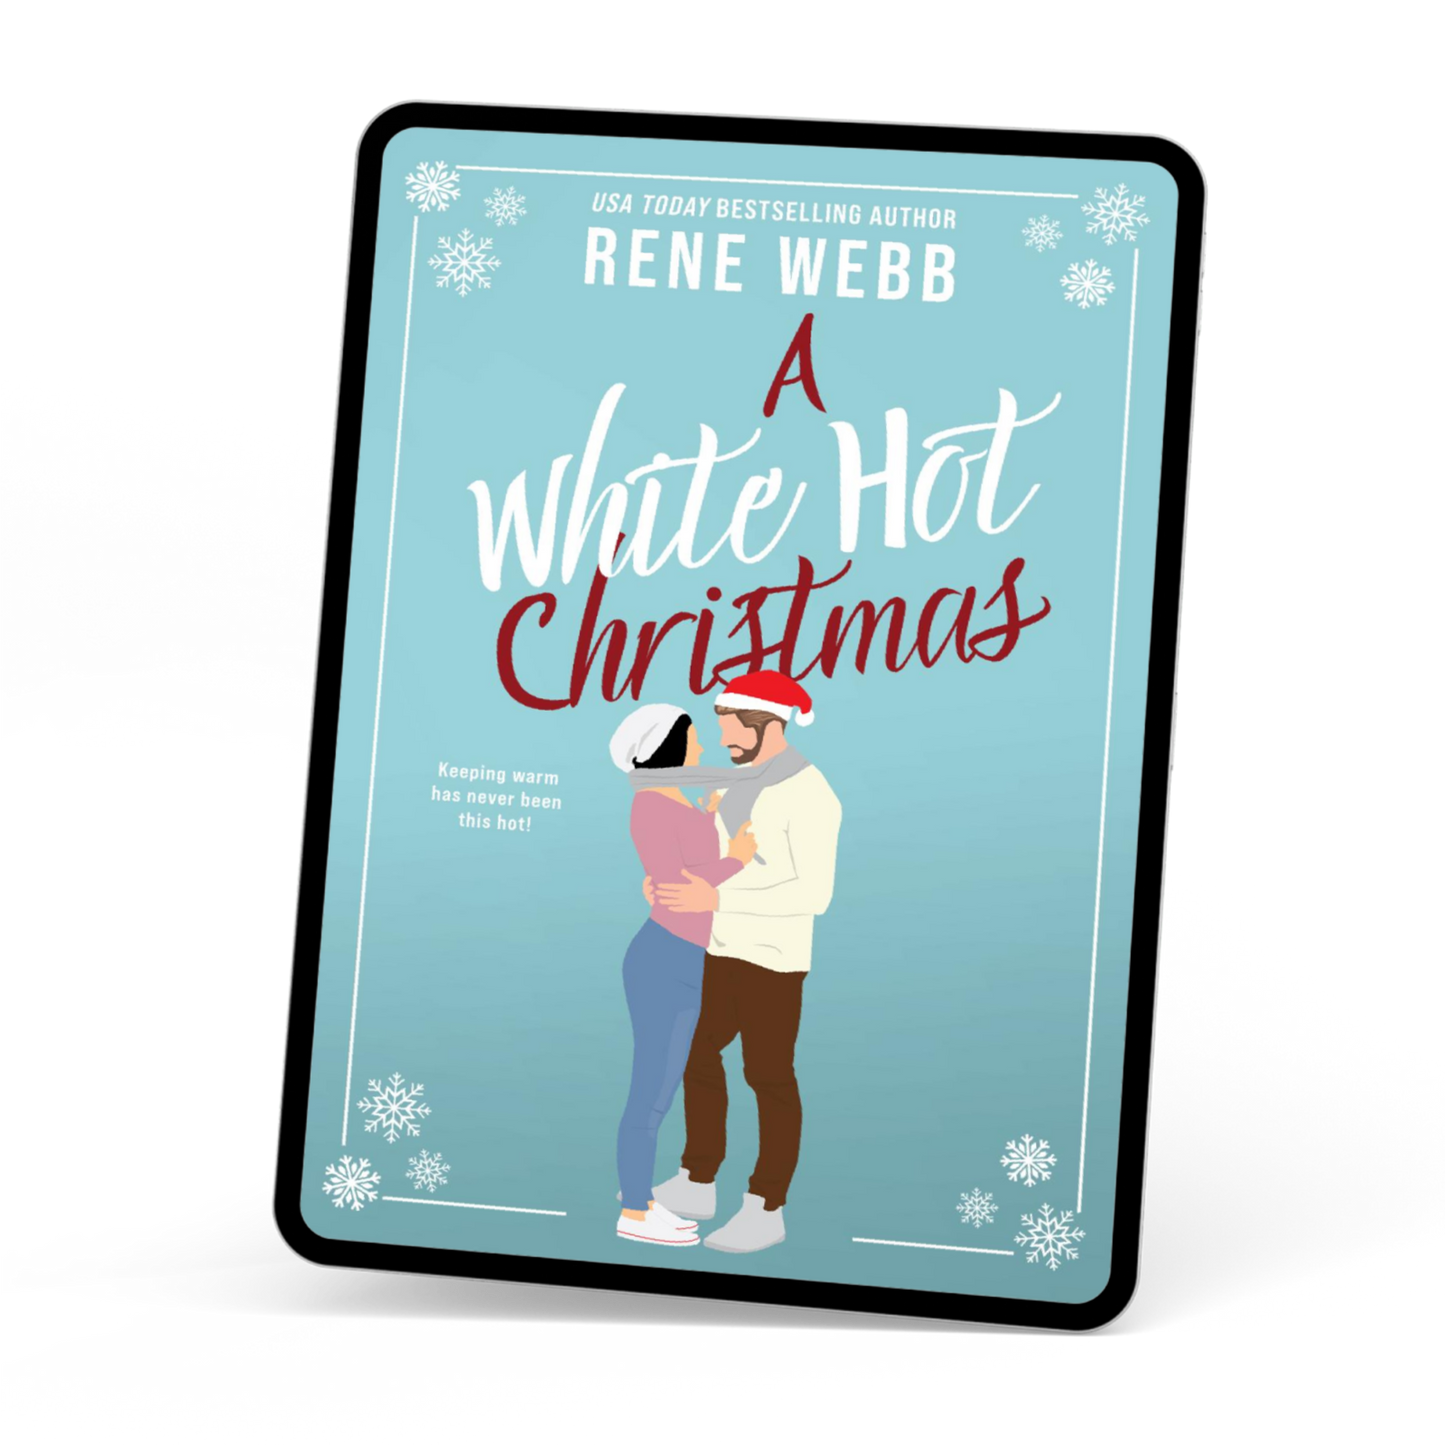 Steamy Small Town Holiday Romance, A White Hot Christmas by Rene Webb